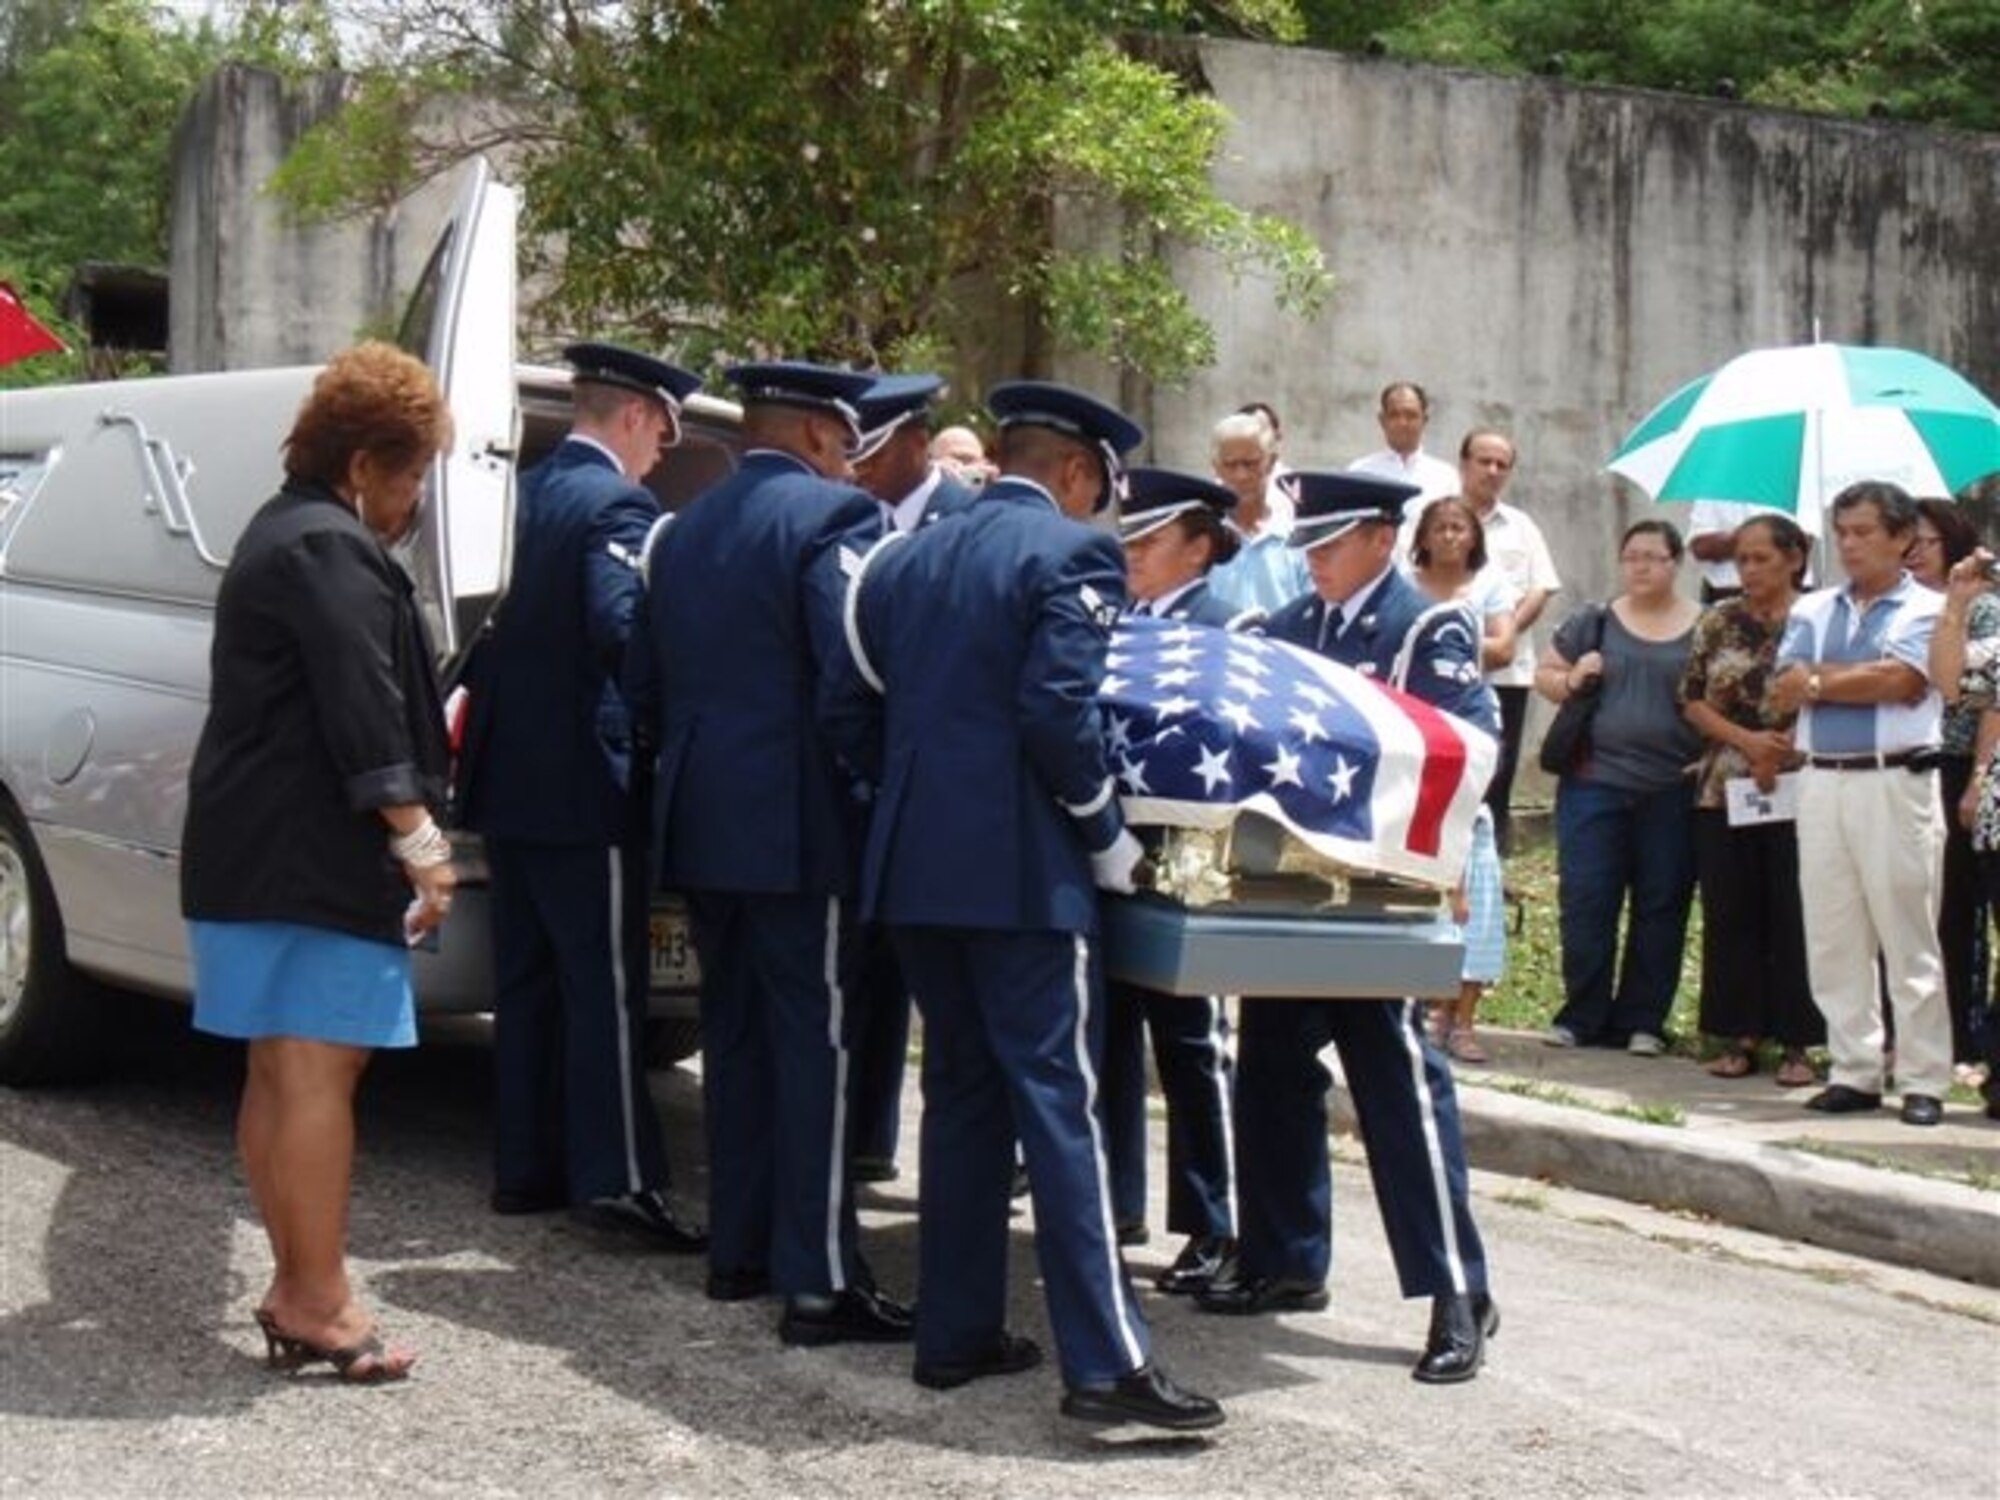 The Team Andersen Honor Guard's primary mission is to provide final military honors to our fallen military members. In this ceremony Team Andersen's Honor Guard were pall bearers. (Courtesy Photo)